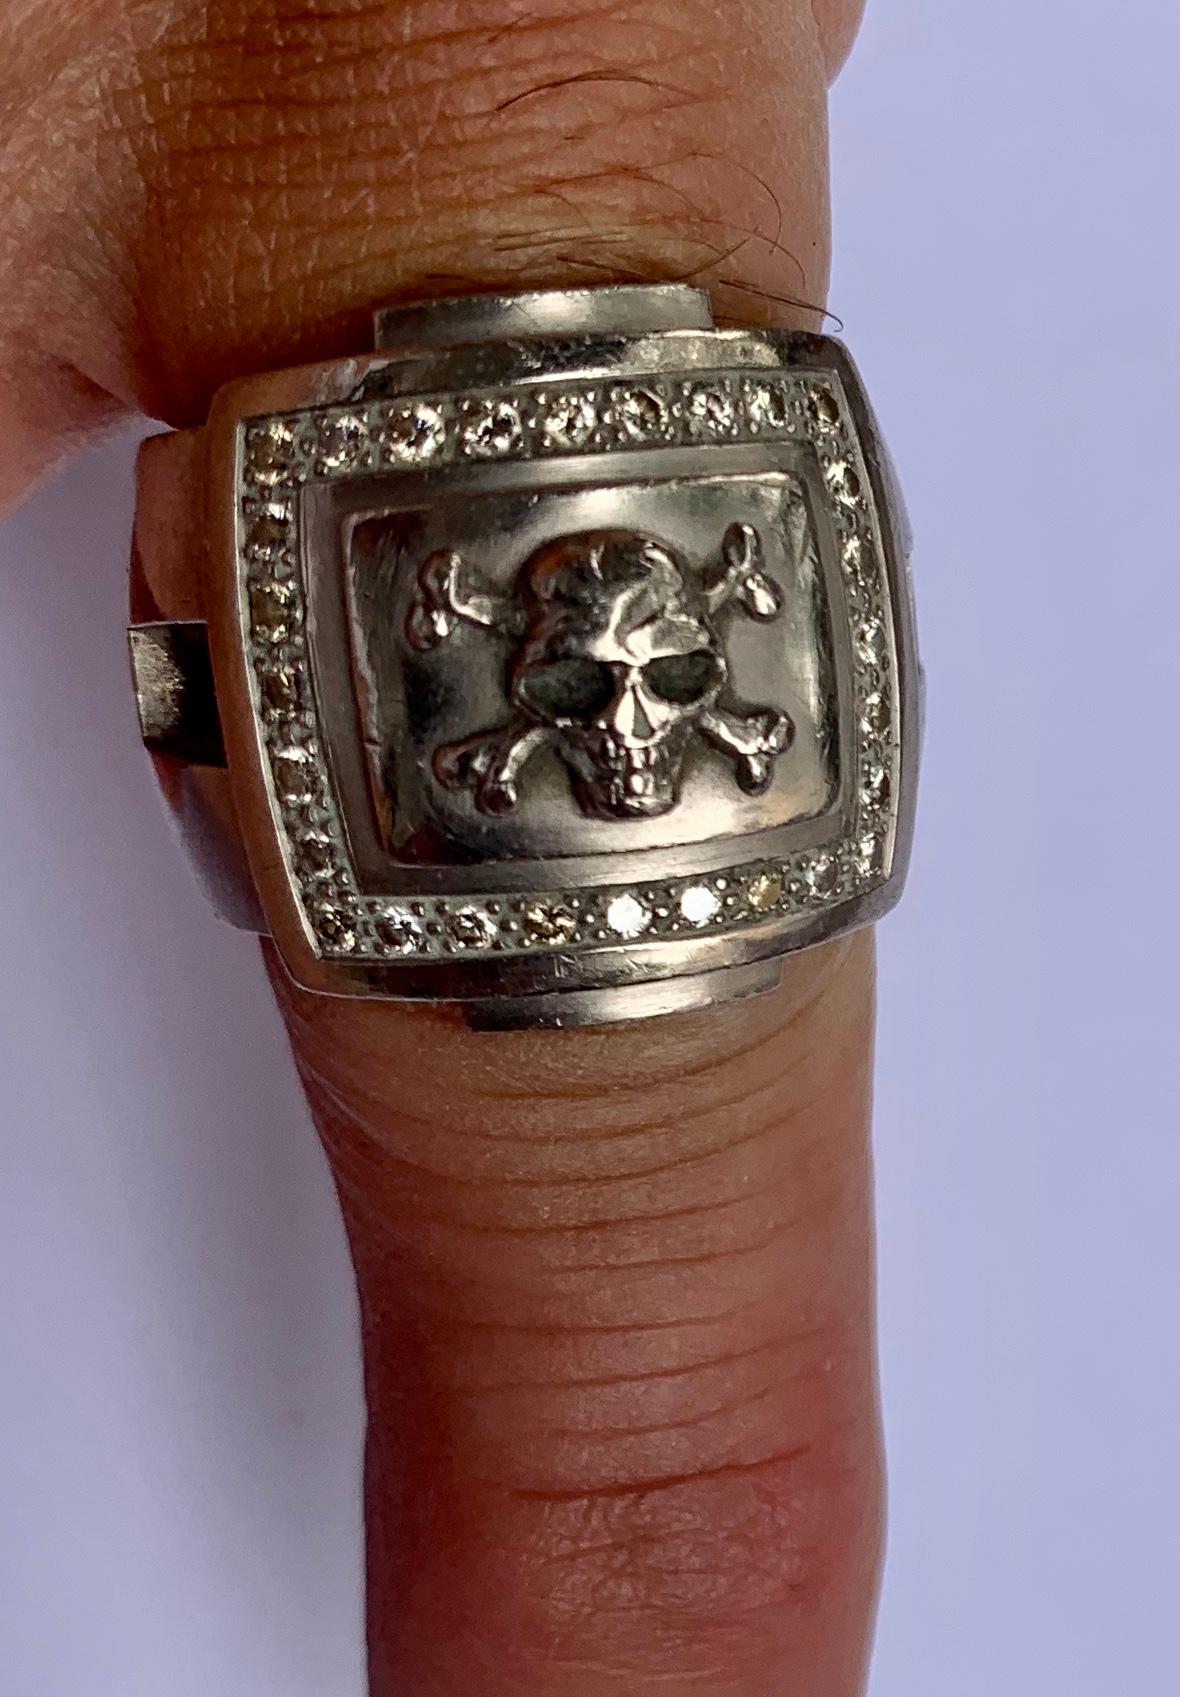 Skull ring in solid 18 K white Gold set with diamonds! This is a unique and bespoke creation by Christophe Graber Zurich, who is internationally known for his mythical creations and jewellery!
The ring is currently size 57/17 but can easily be